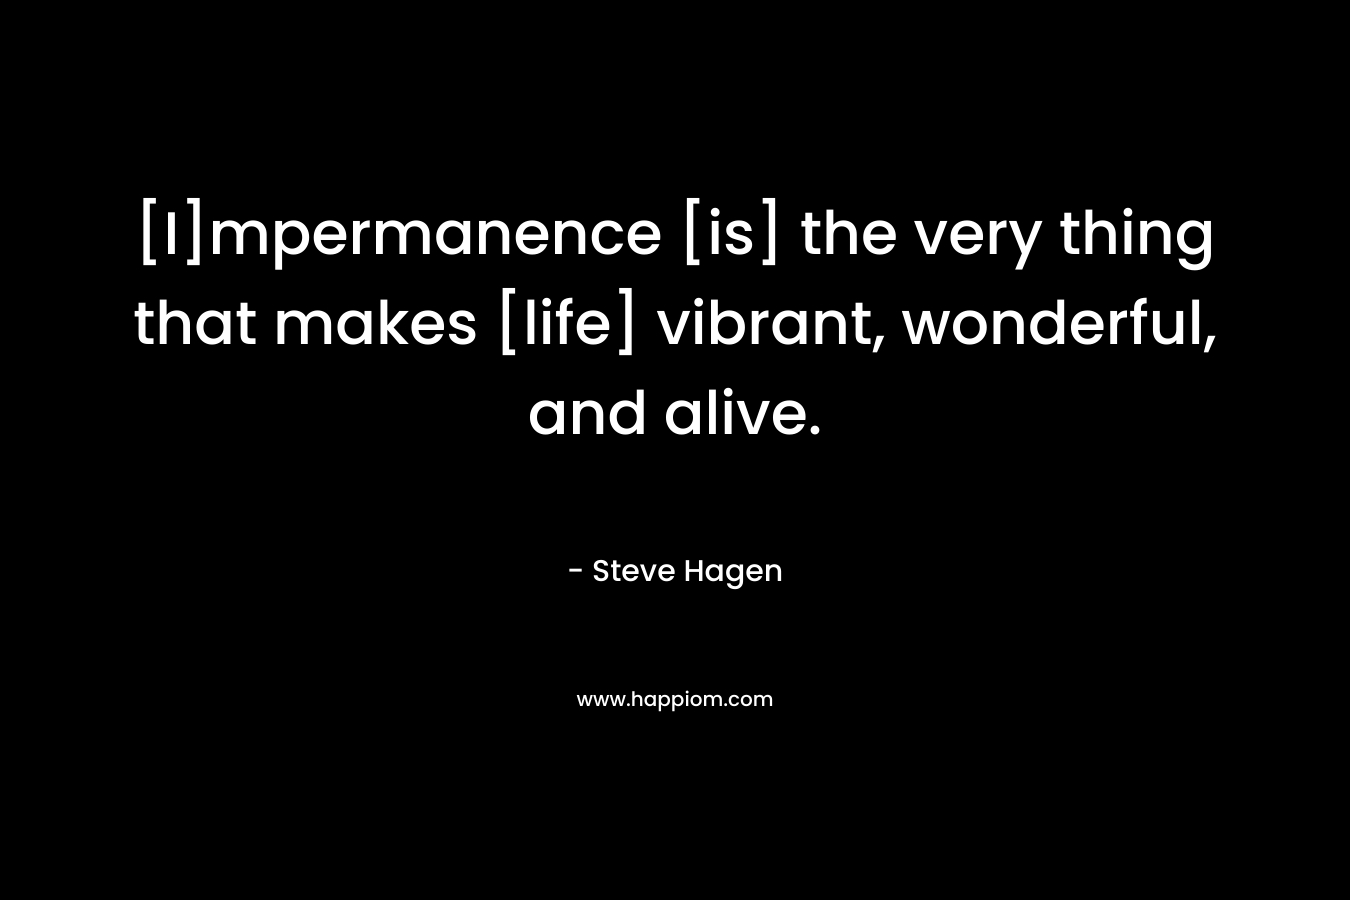 [I]mpermanence [is] the very thing that makes [life] vibrant, wonderful, and alive. – Steve Hagen